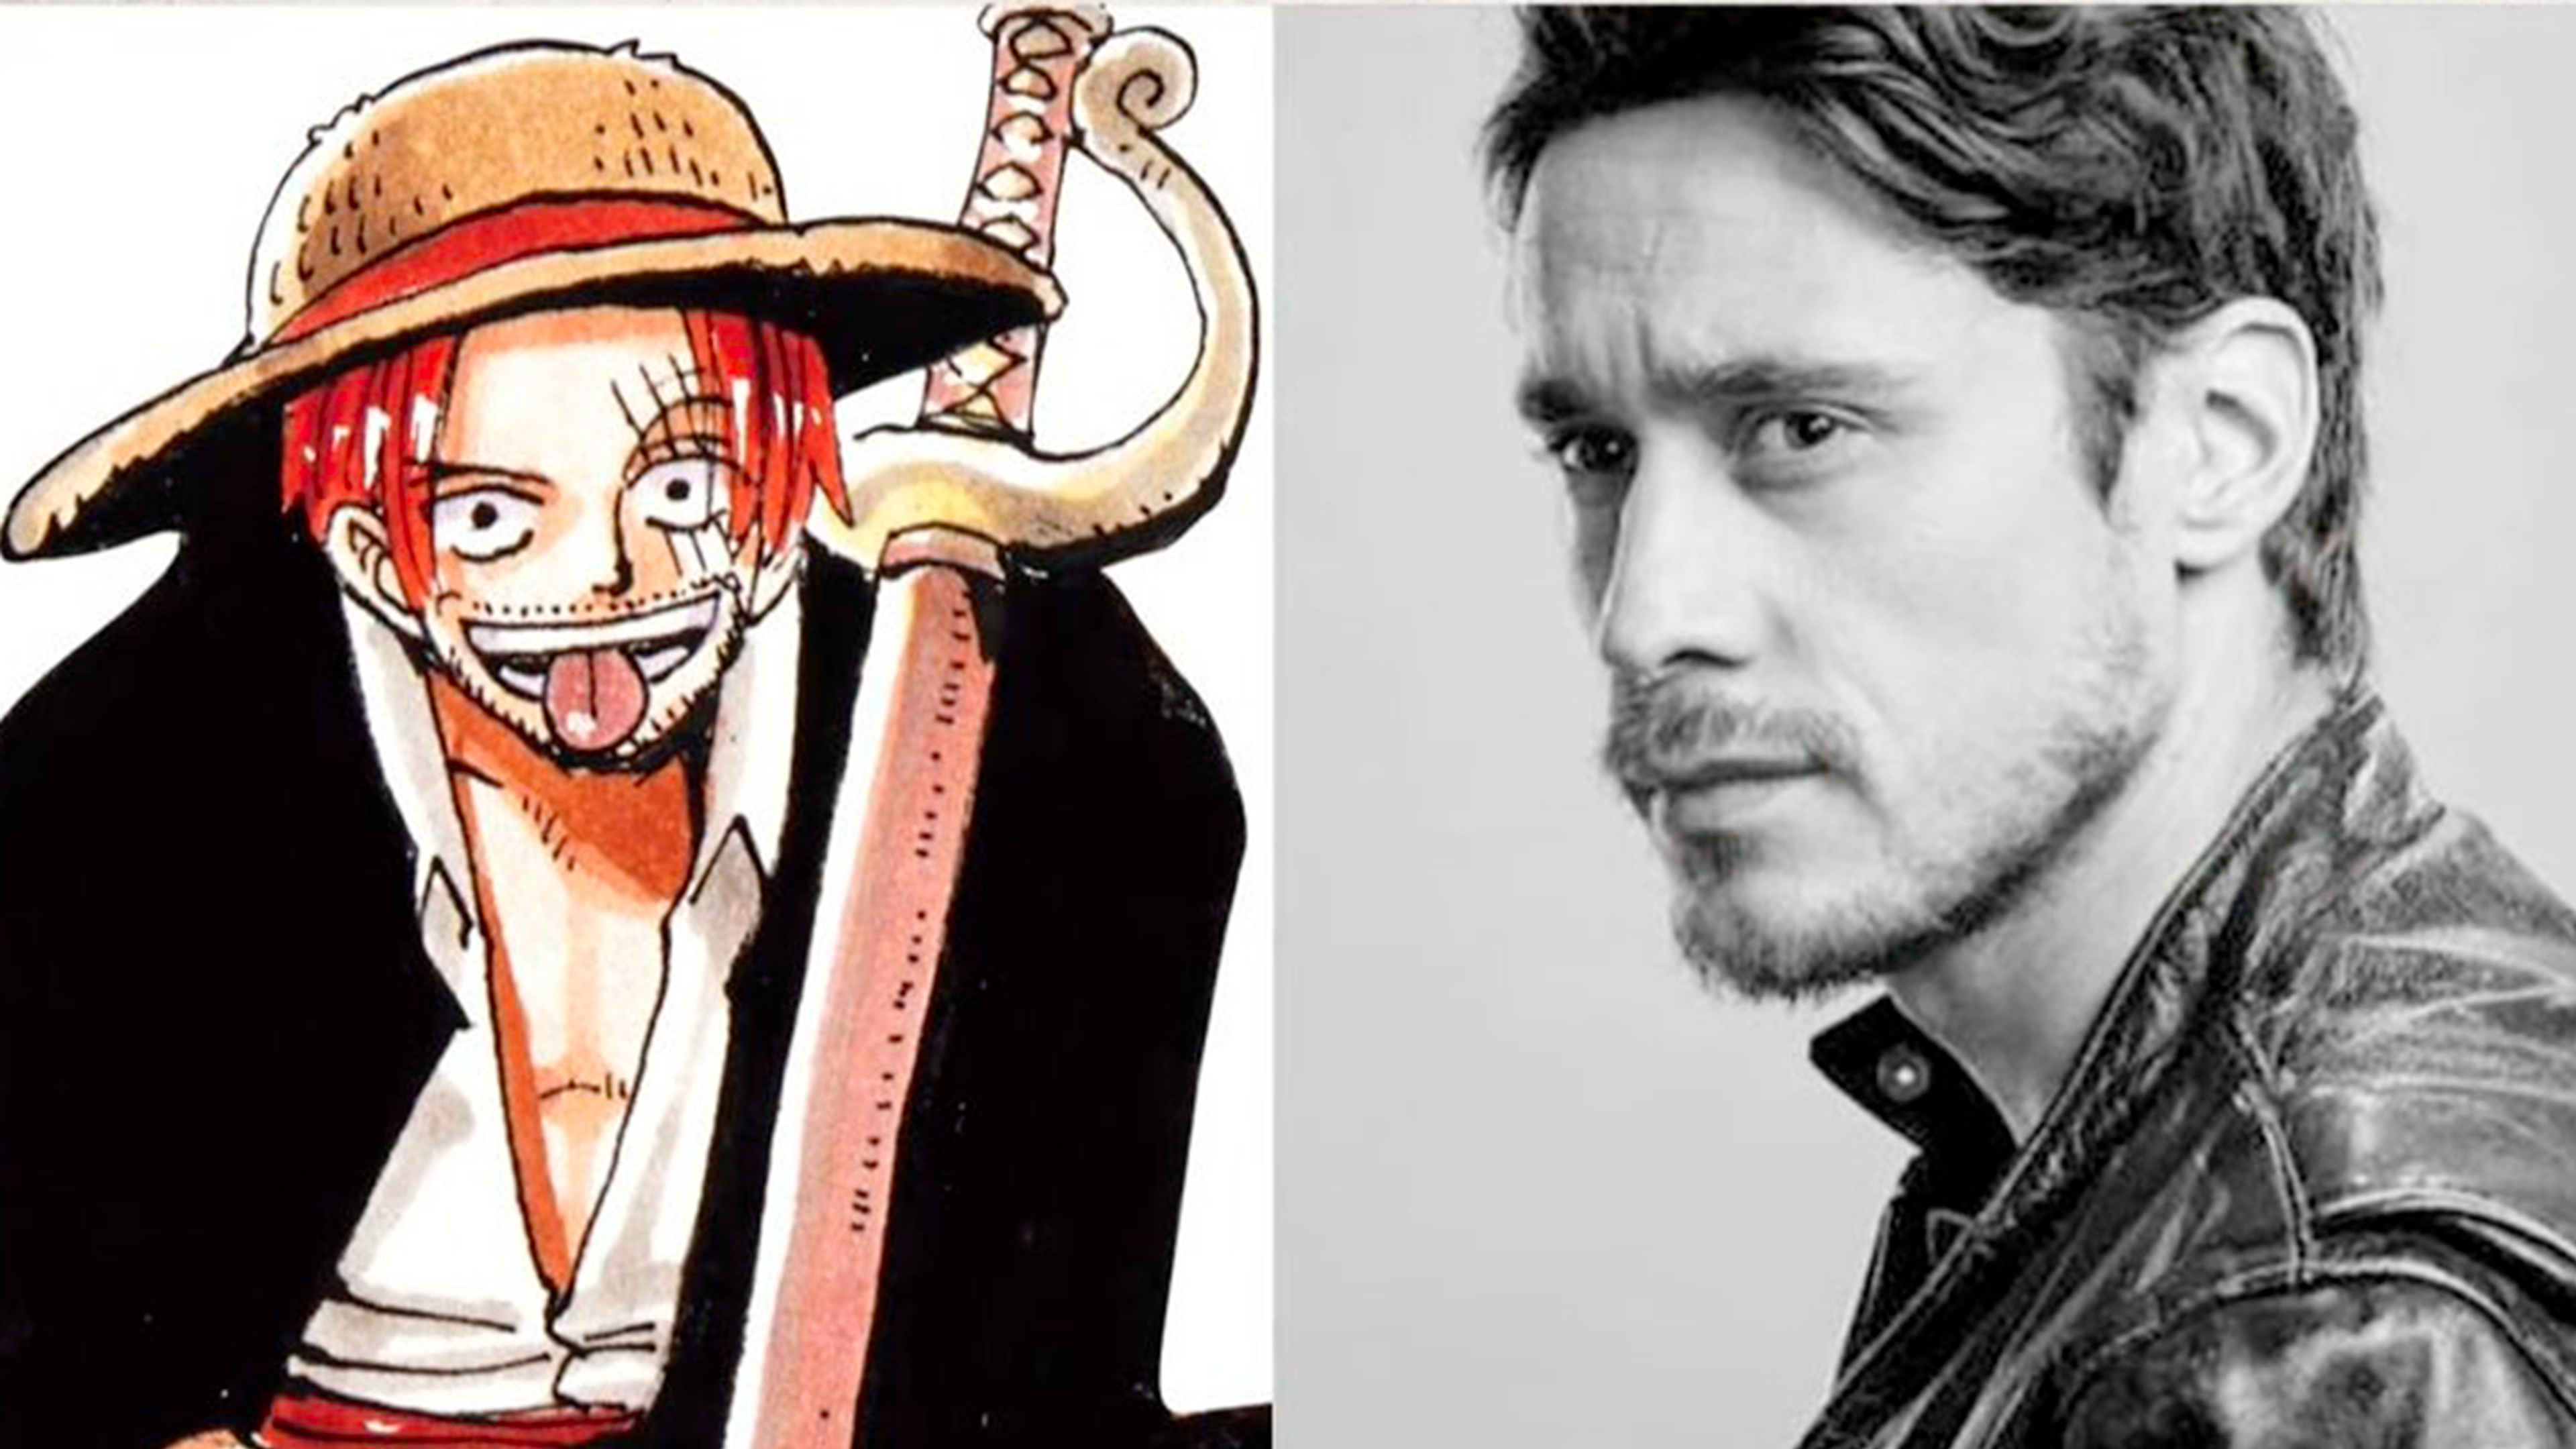 shanks-one-piece-live-action.jpg